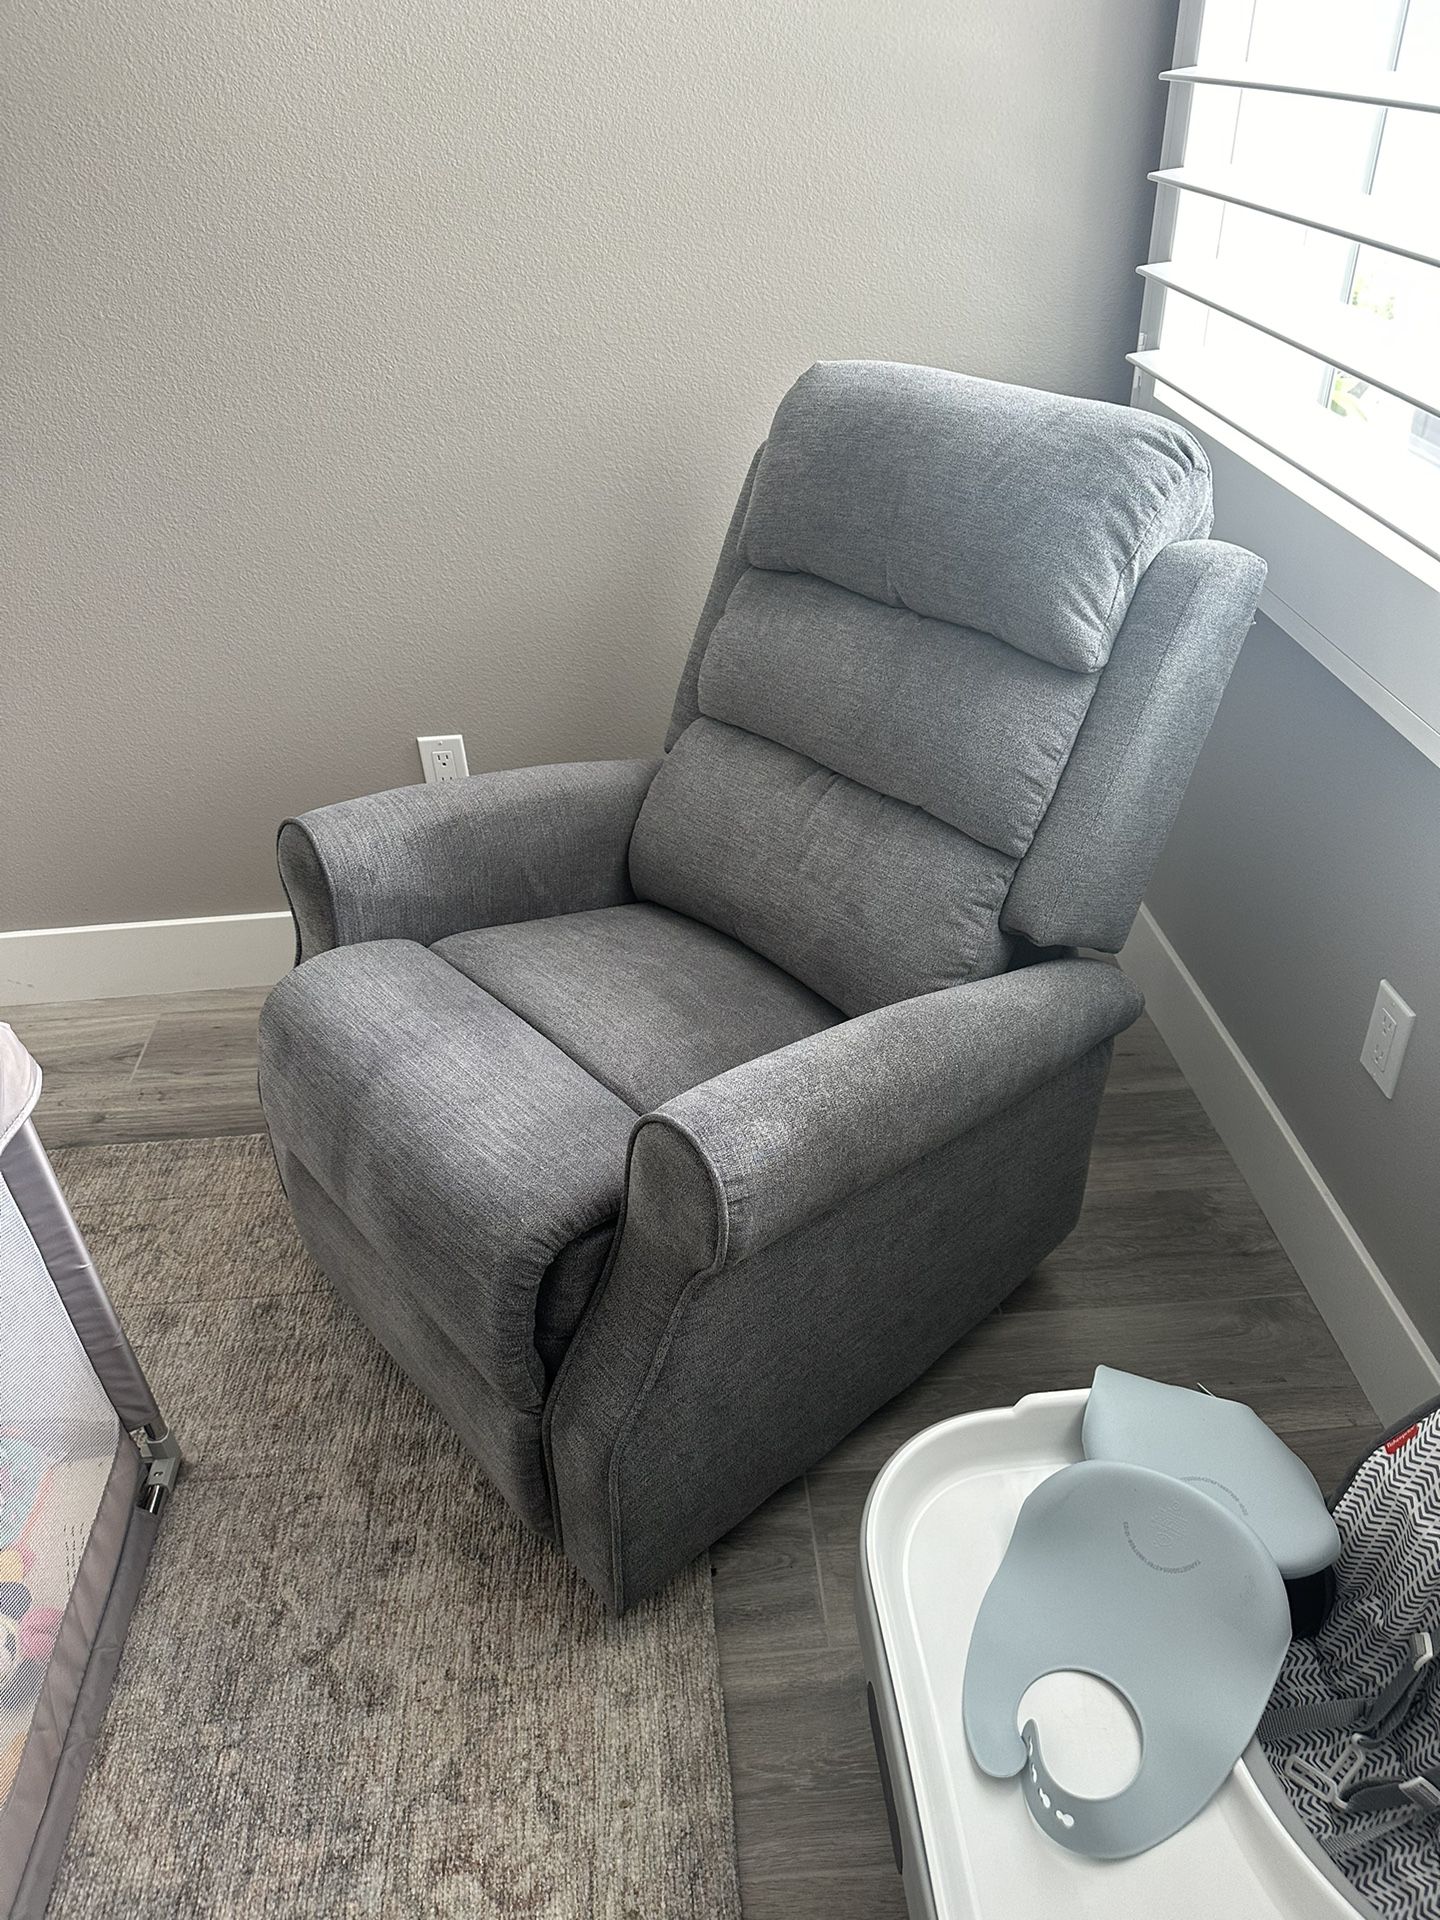 Langdale Recliner From Costco. 2 Years New